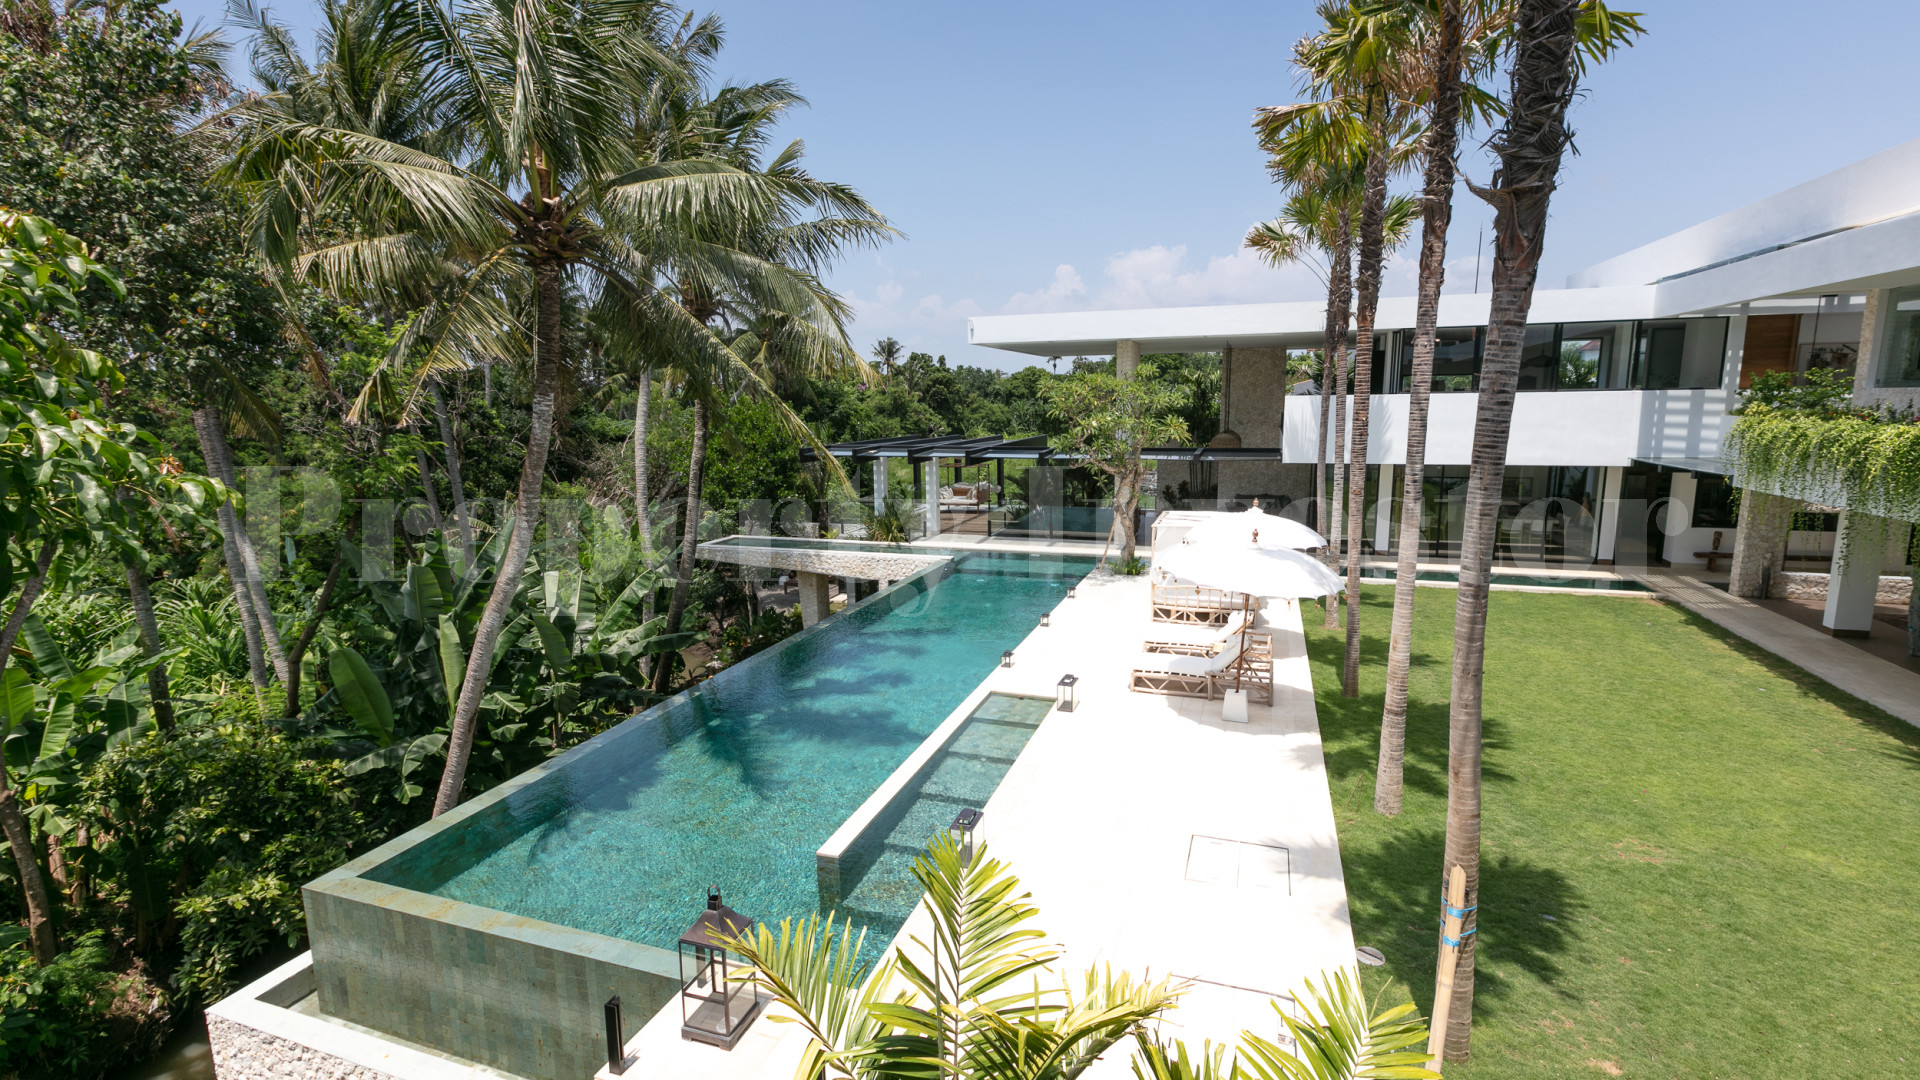 Breathtaking 7 Bedroom Ultra-Modern Luxury Villa with Incredible Infinity Pool & Outdoor Spaces for Sale in Pererenan-Canggu, Bali